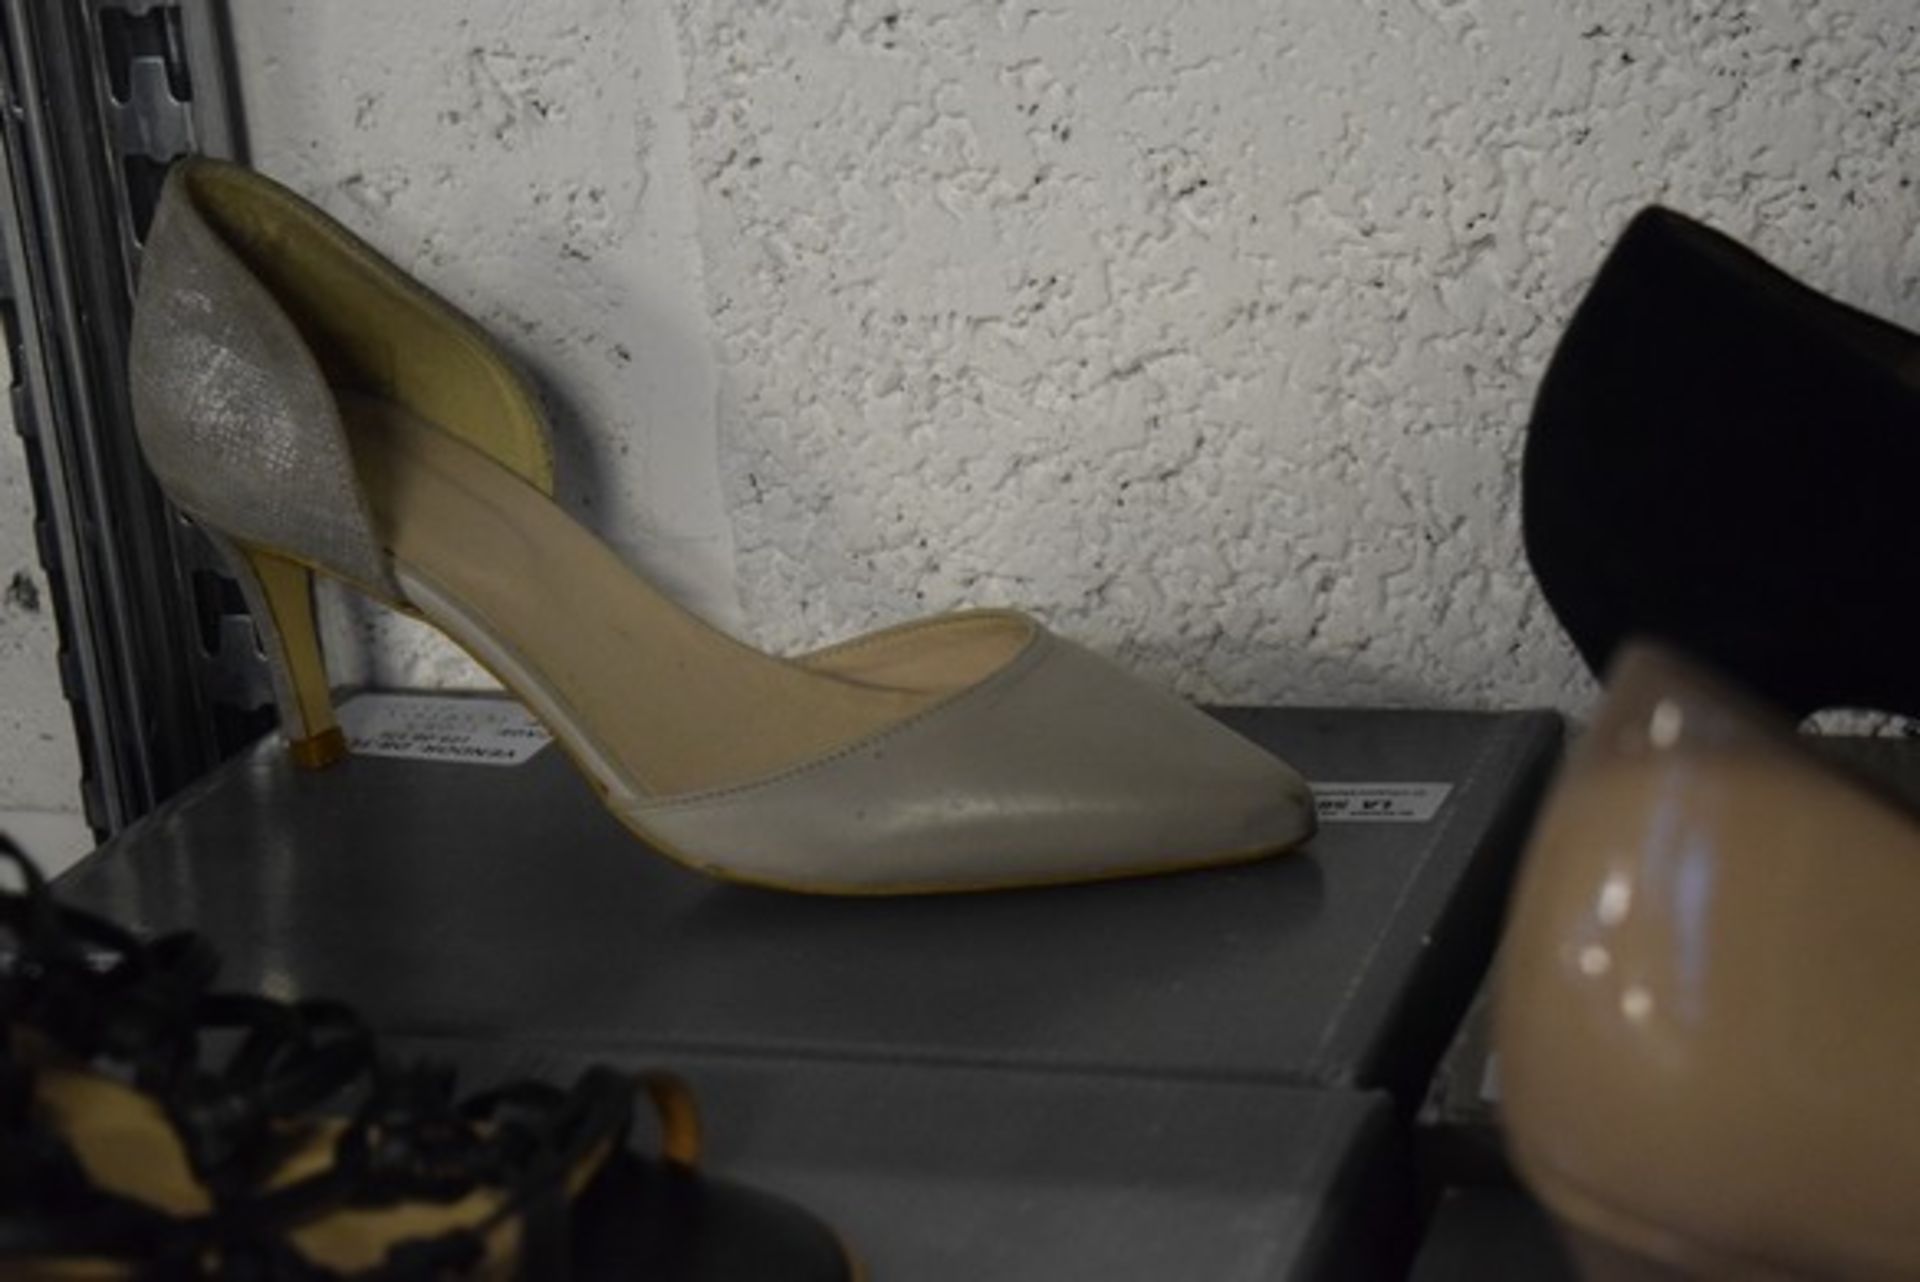 1 x BOXED PAIR OF LADIES DESIGNER HEELED SHOES SIZE 40 RRP £35 25.09.17 1.043 *PLEASE NOTE THAT